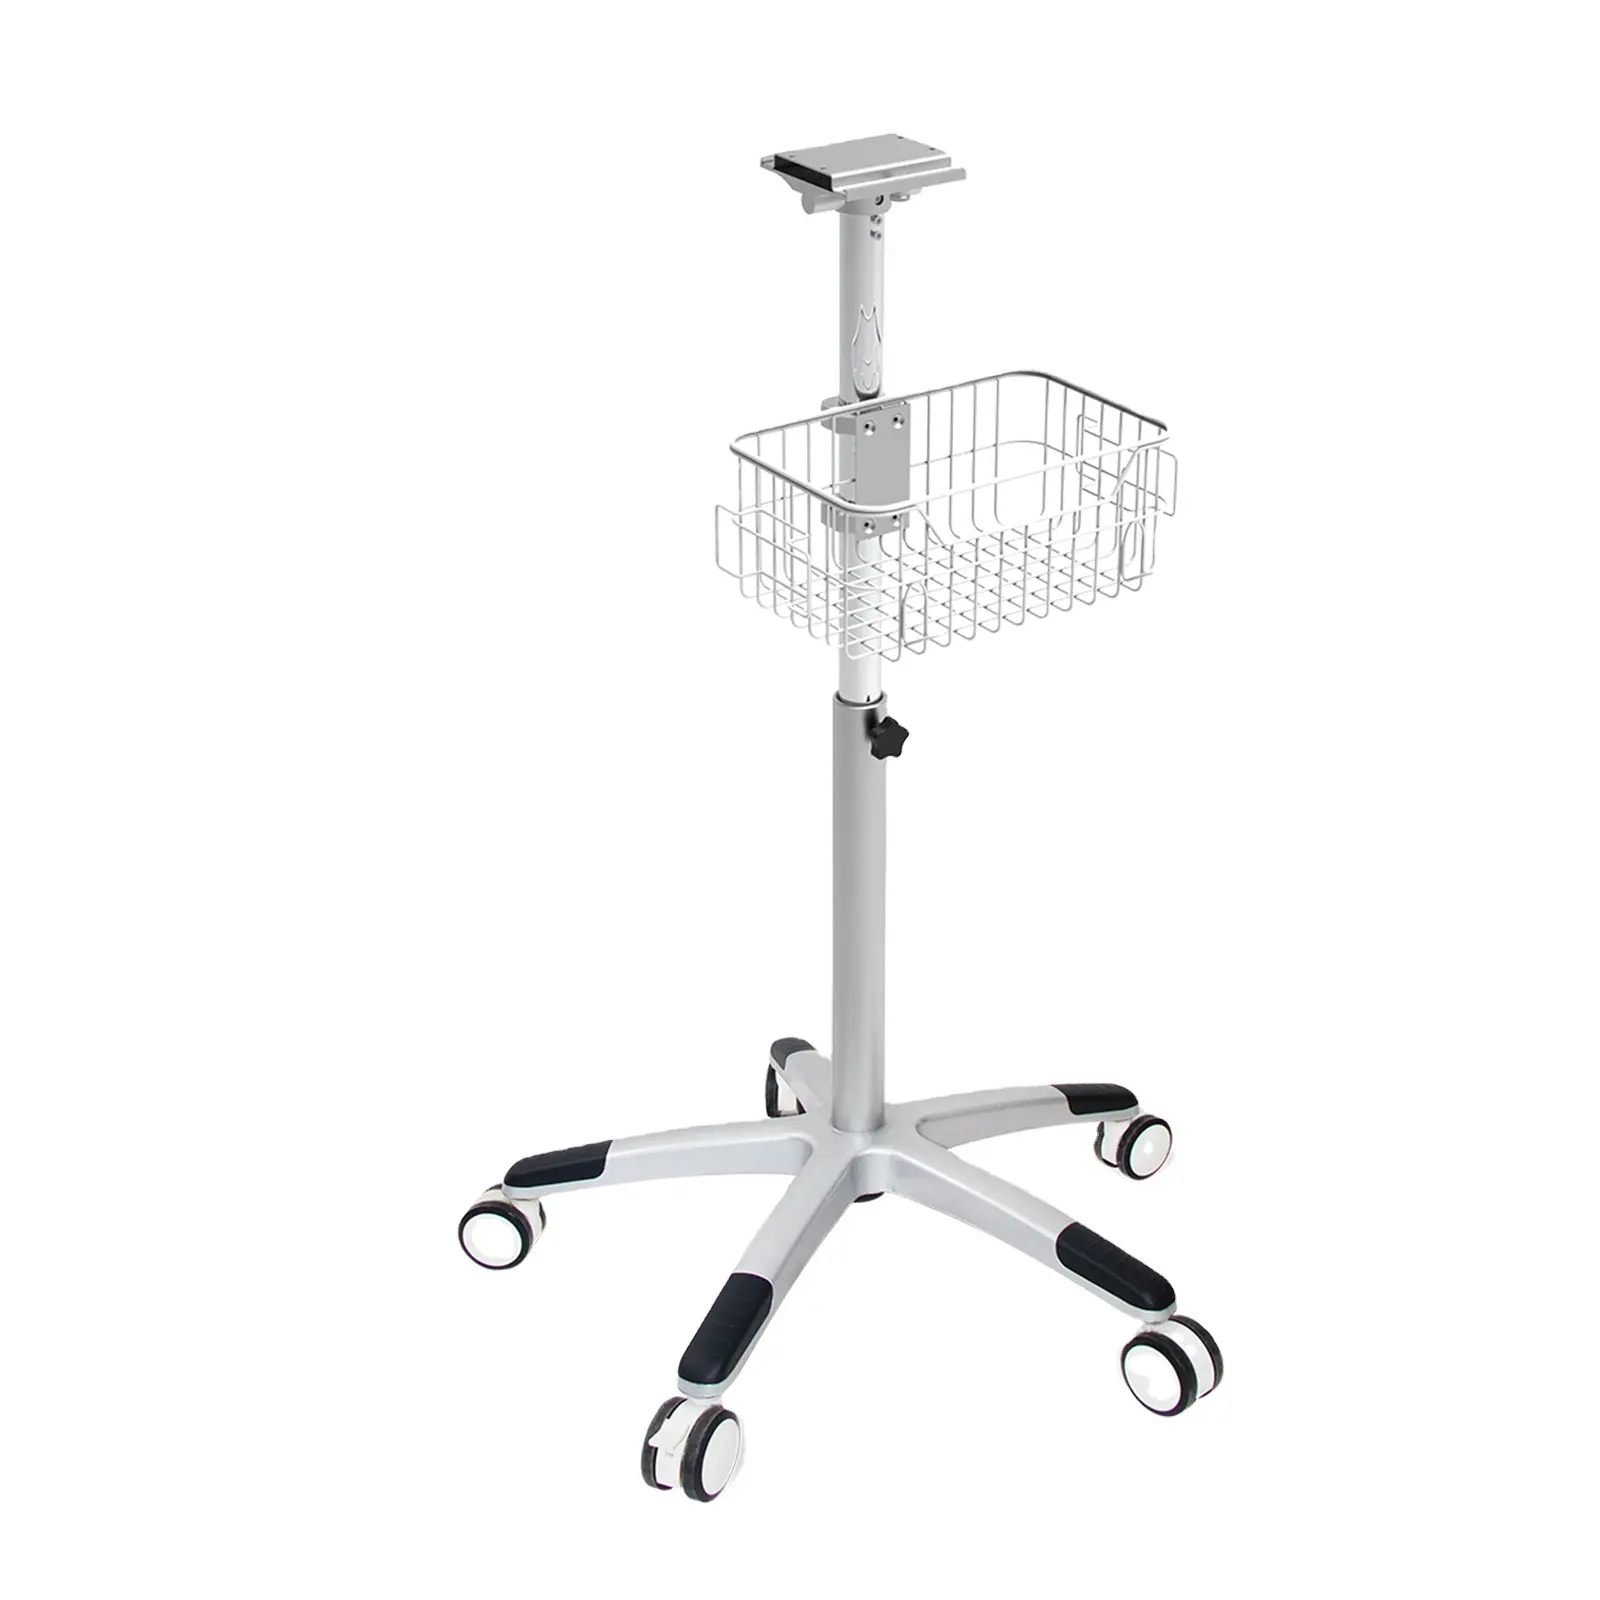 CONTEC Vertical Support Bracket Stand  patient monitoring Mobile Trolley